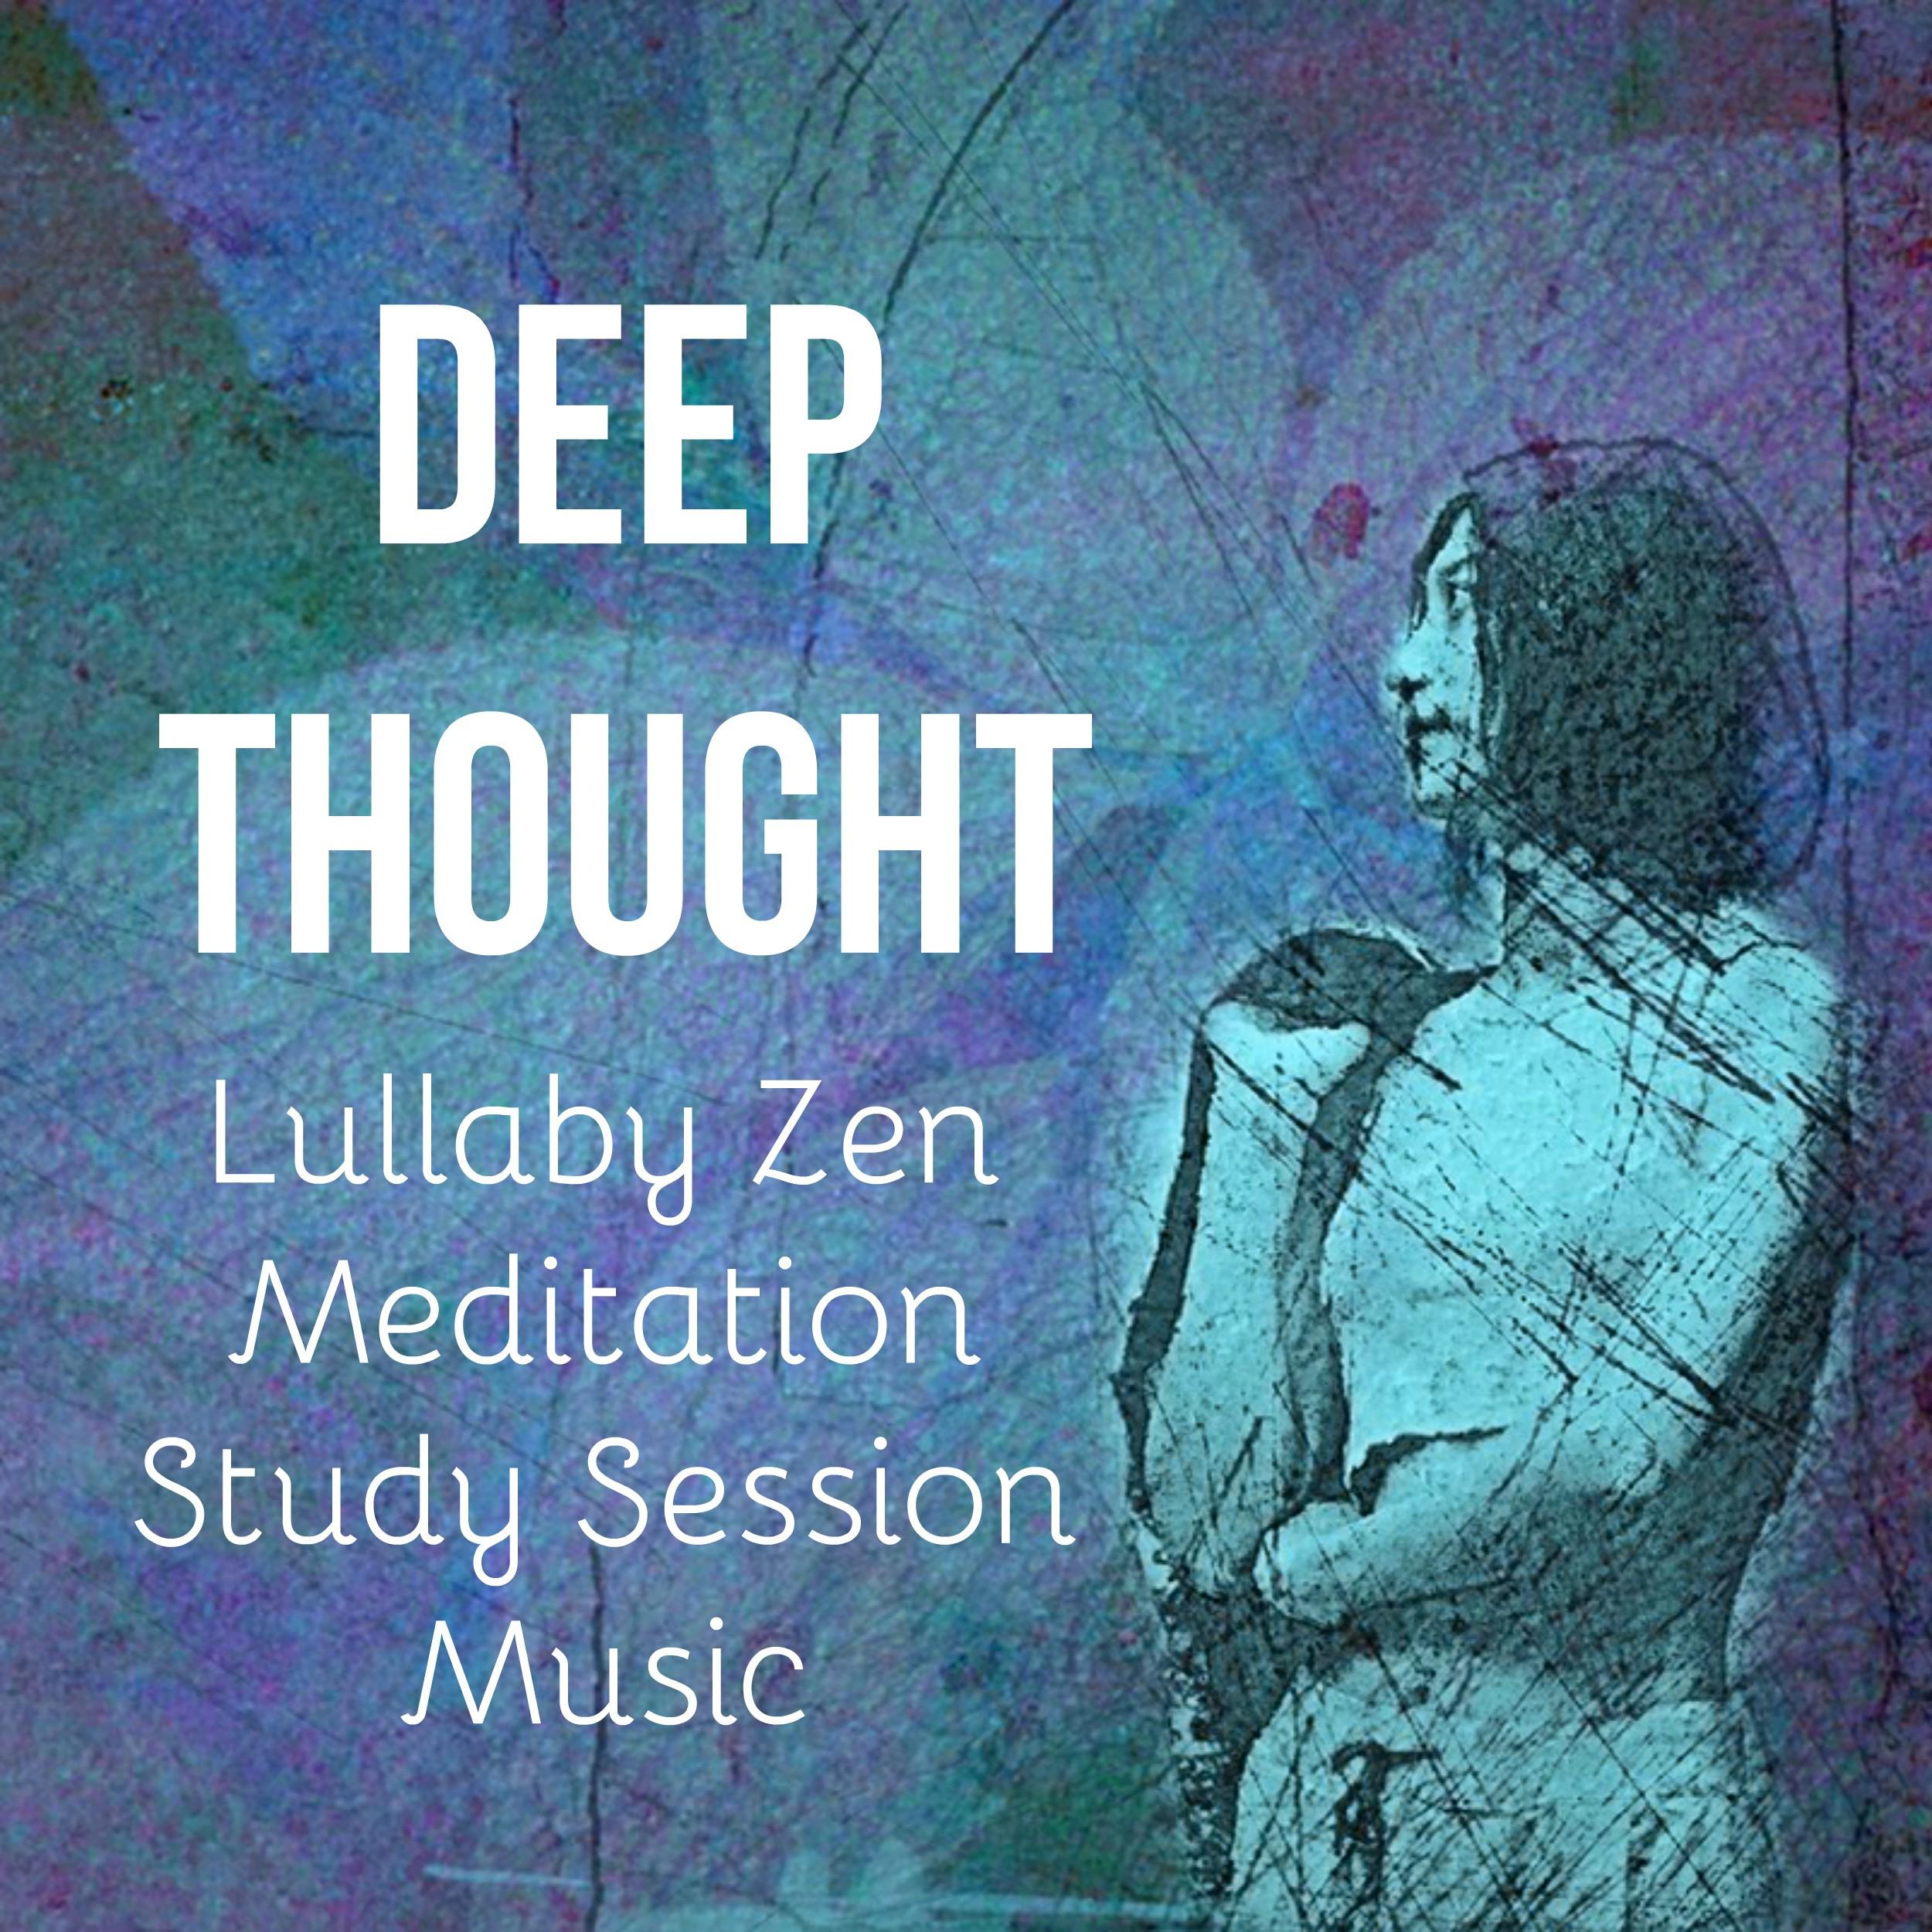 Deep Thought - Lullaby Zen Meditation Study Session Music for Natural Energy Chakra Therapy Healing Massage with New Age Instrumental Soft Sounds